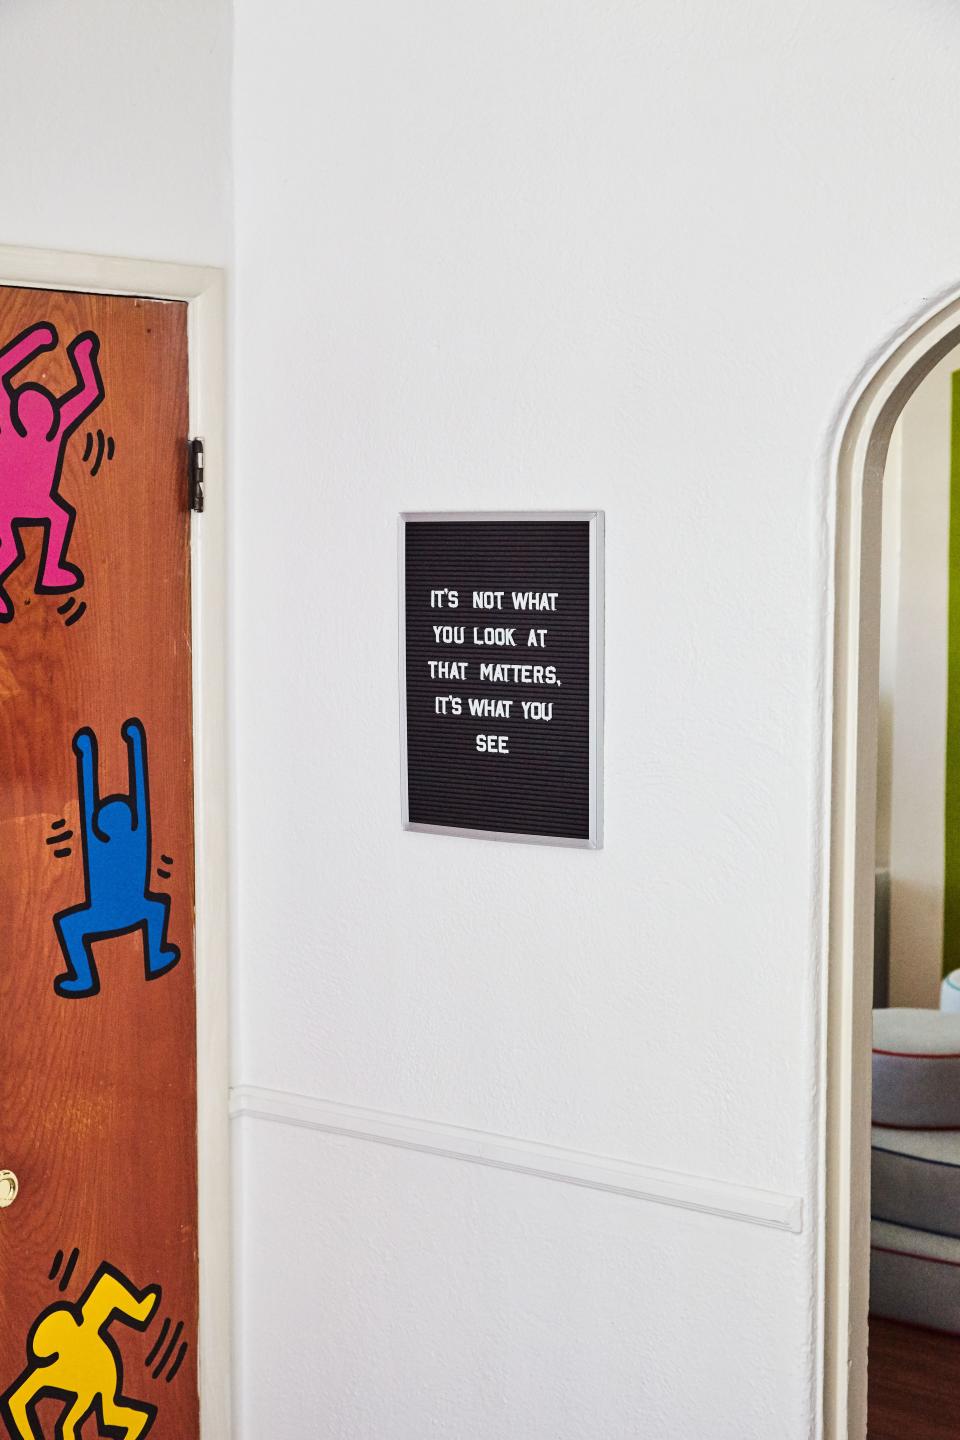 Last but not least, a little Keith Haring on the door and a little Henry David Thoreau on the wall.